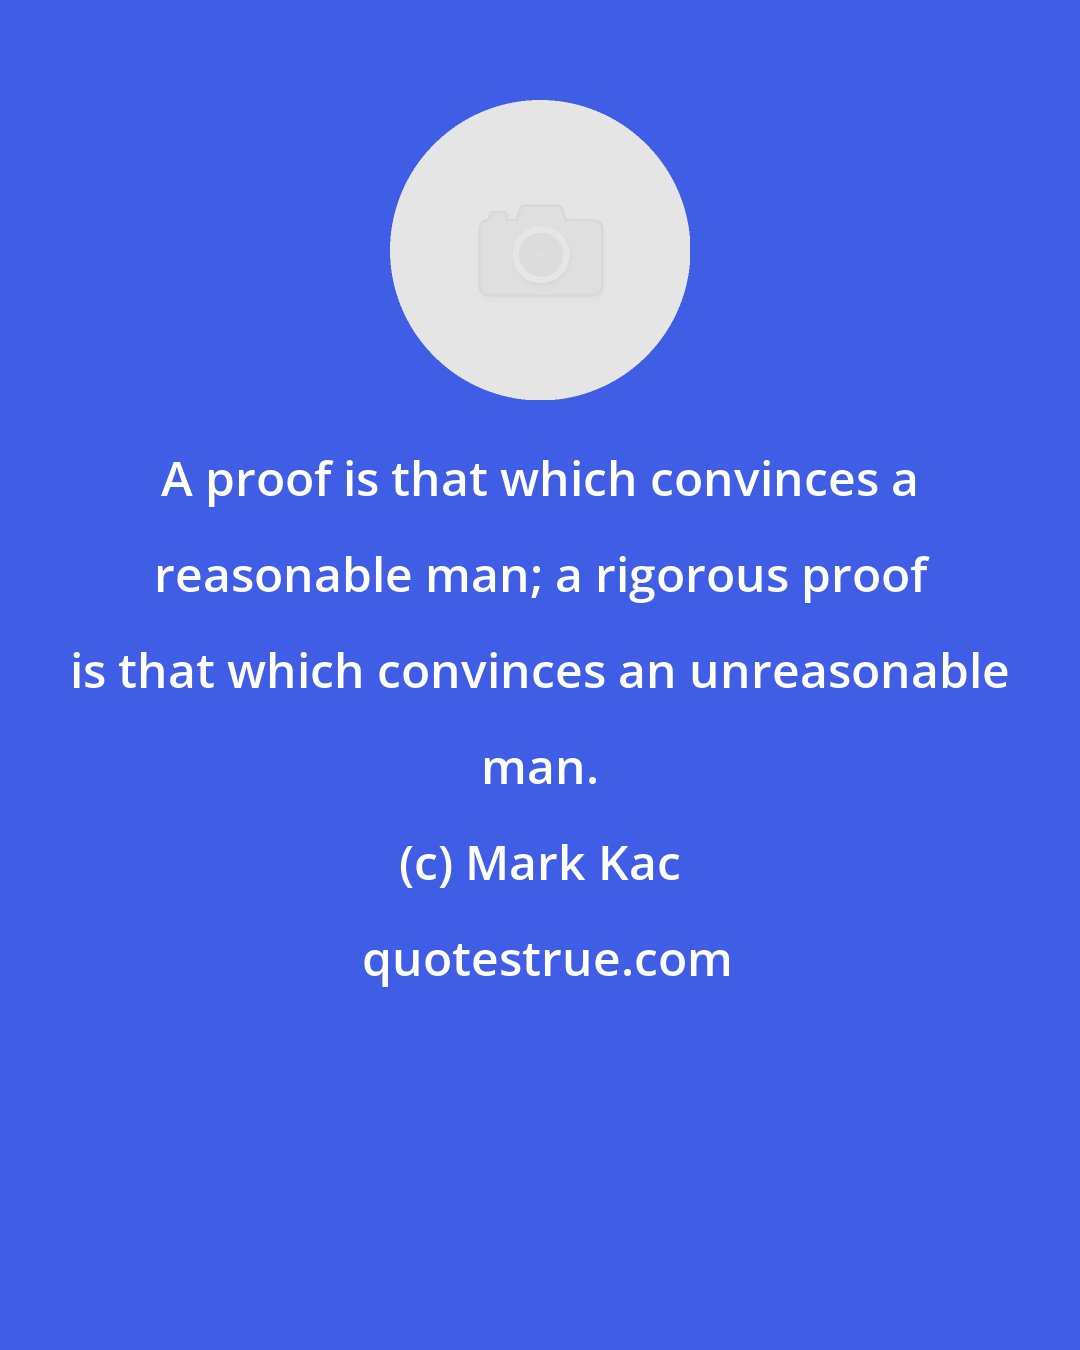 Mark Kac: A proof is that which convinces a reasonable man; a rigorous proof is that which convinces an unreasonable man.